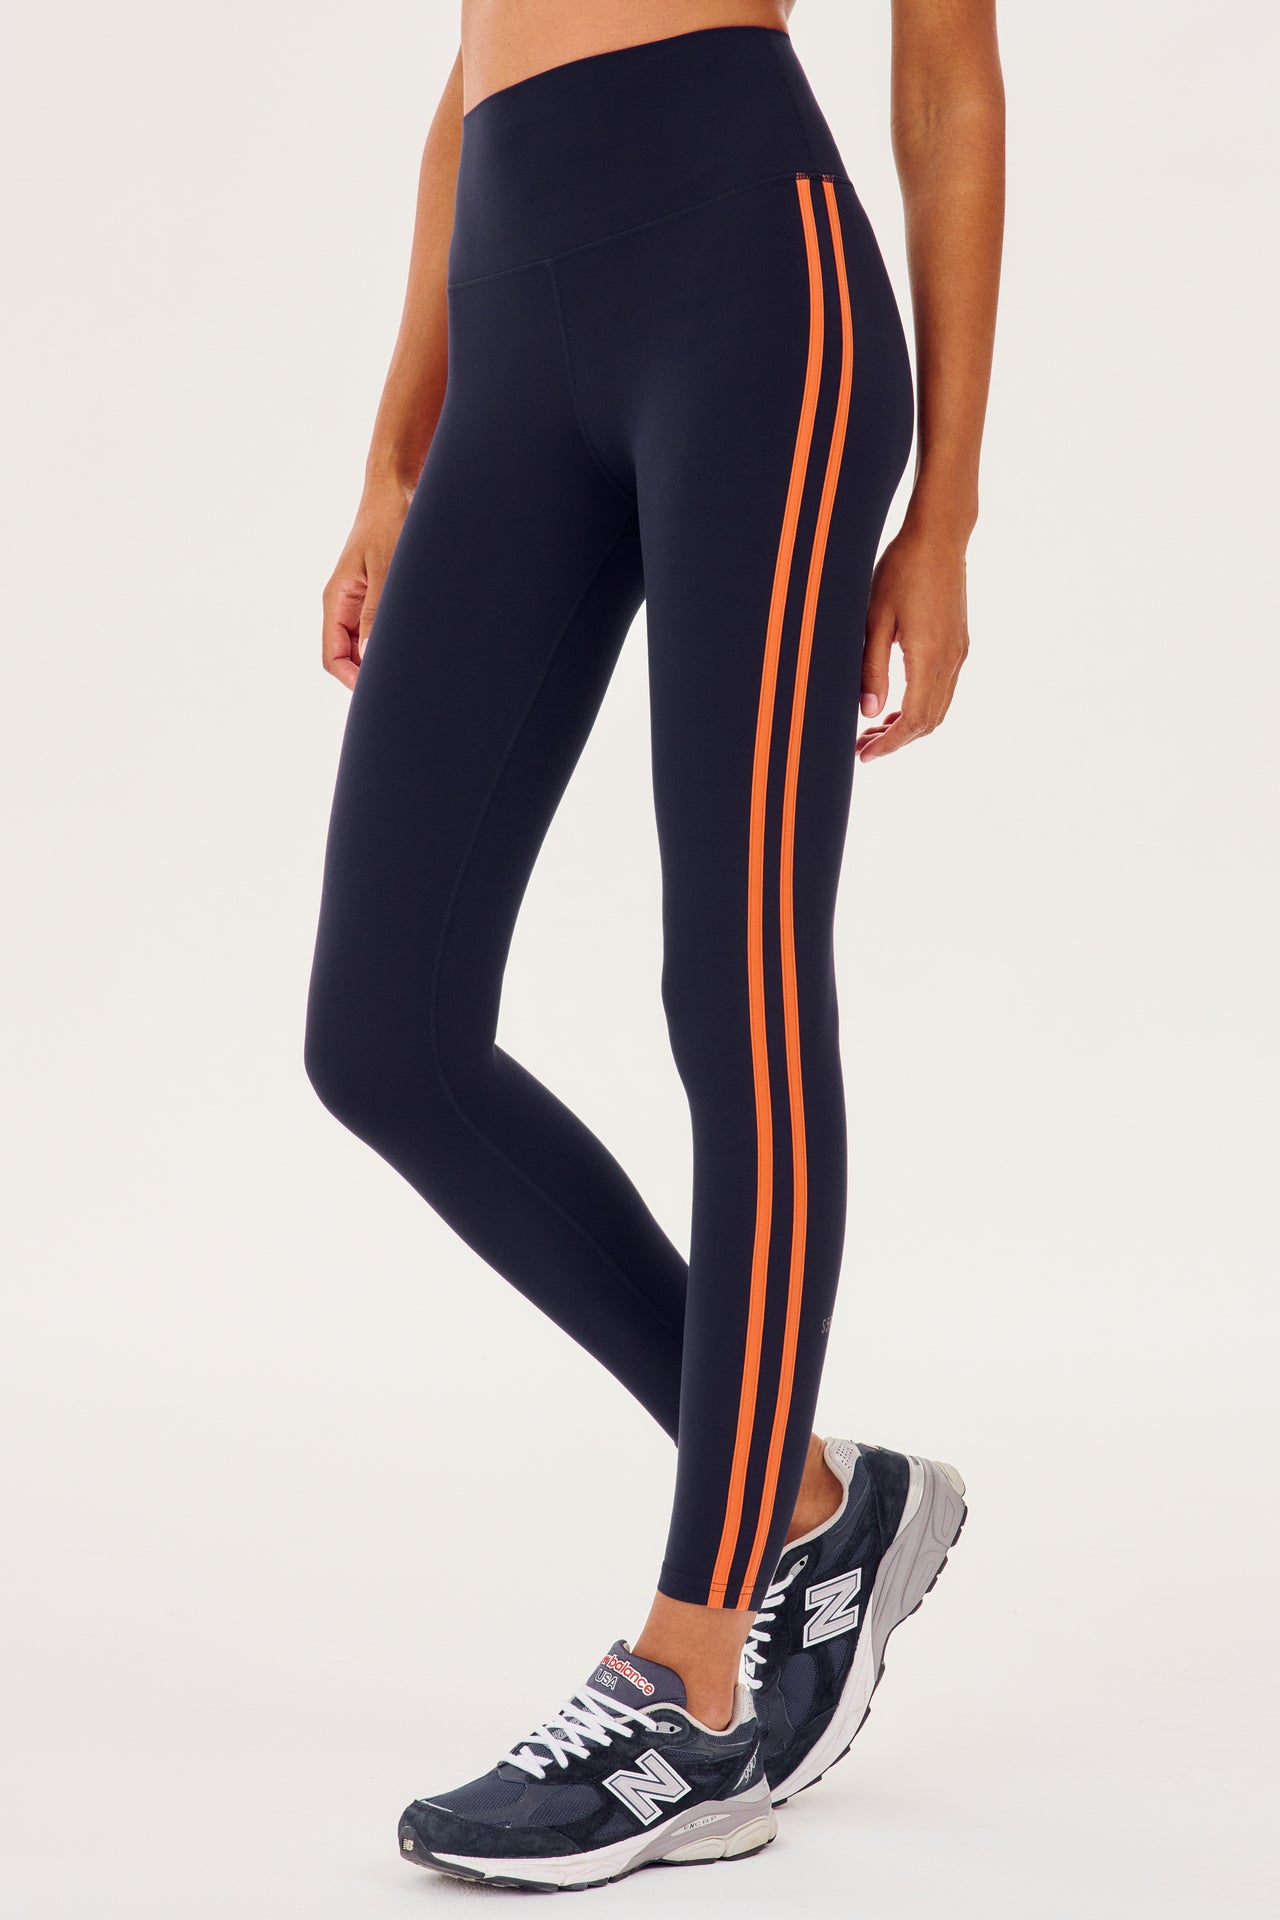 Side view of girl wearing dark blue leggings with two thin red stripes down the side with dark blue shoes